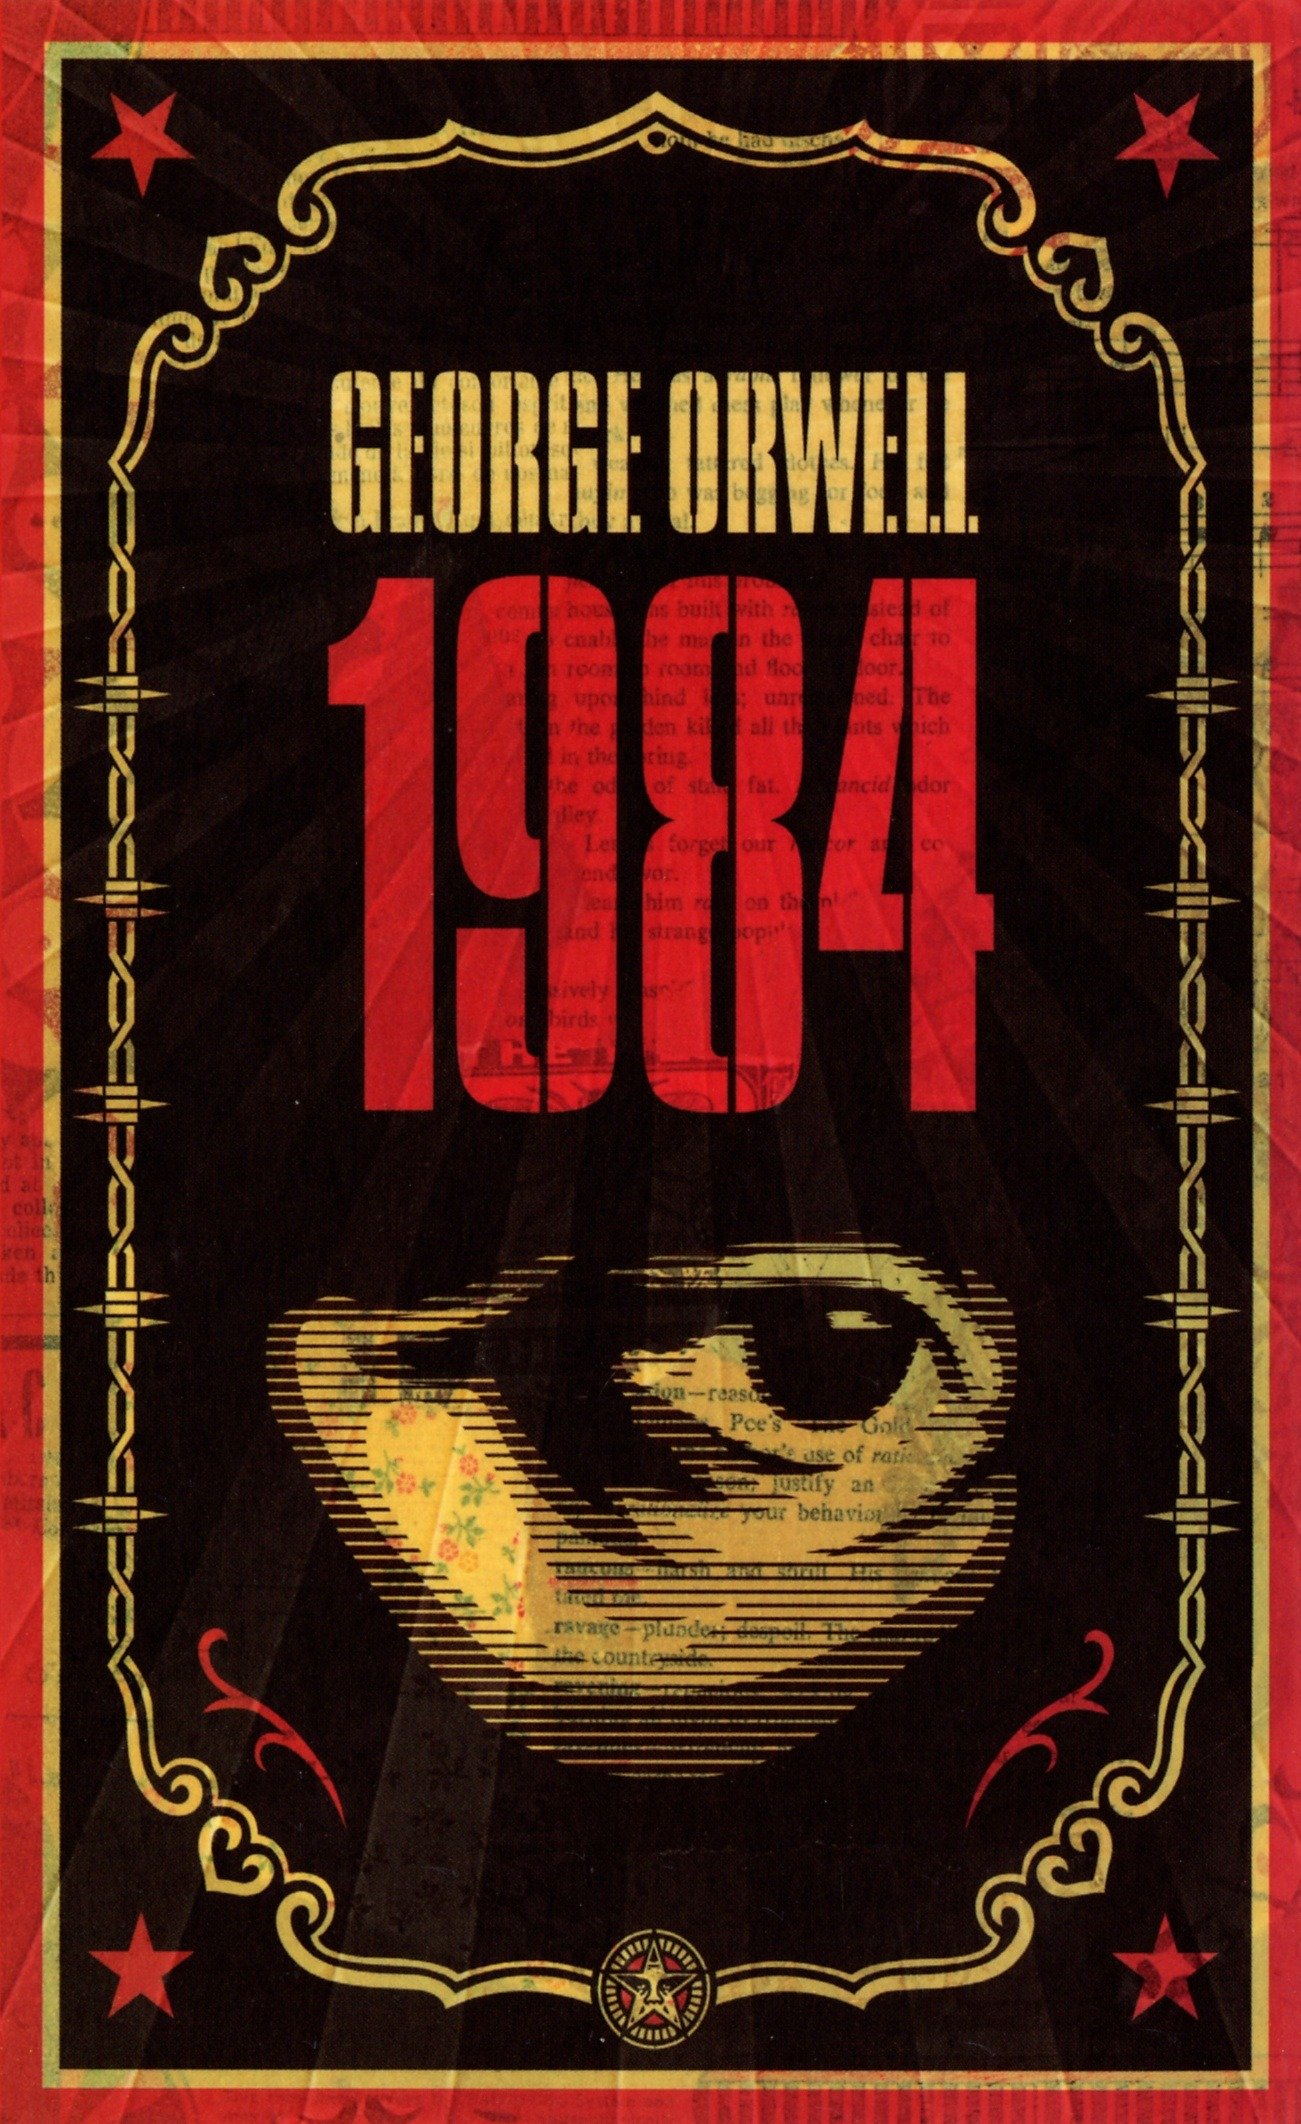 book to read -1984, by George Orwell